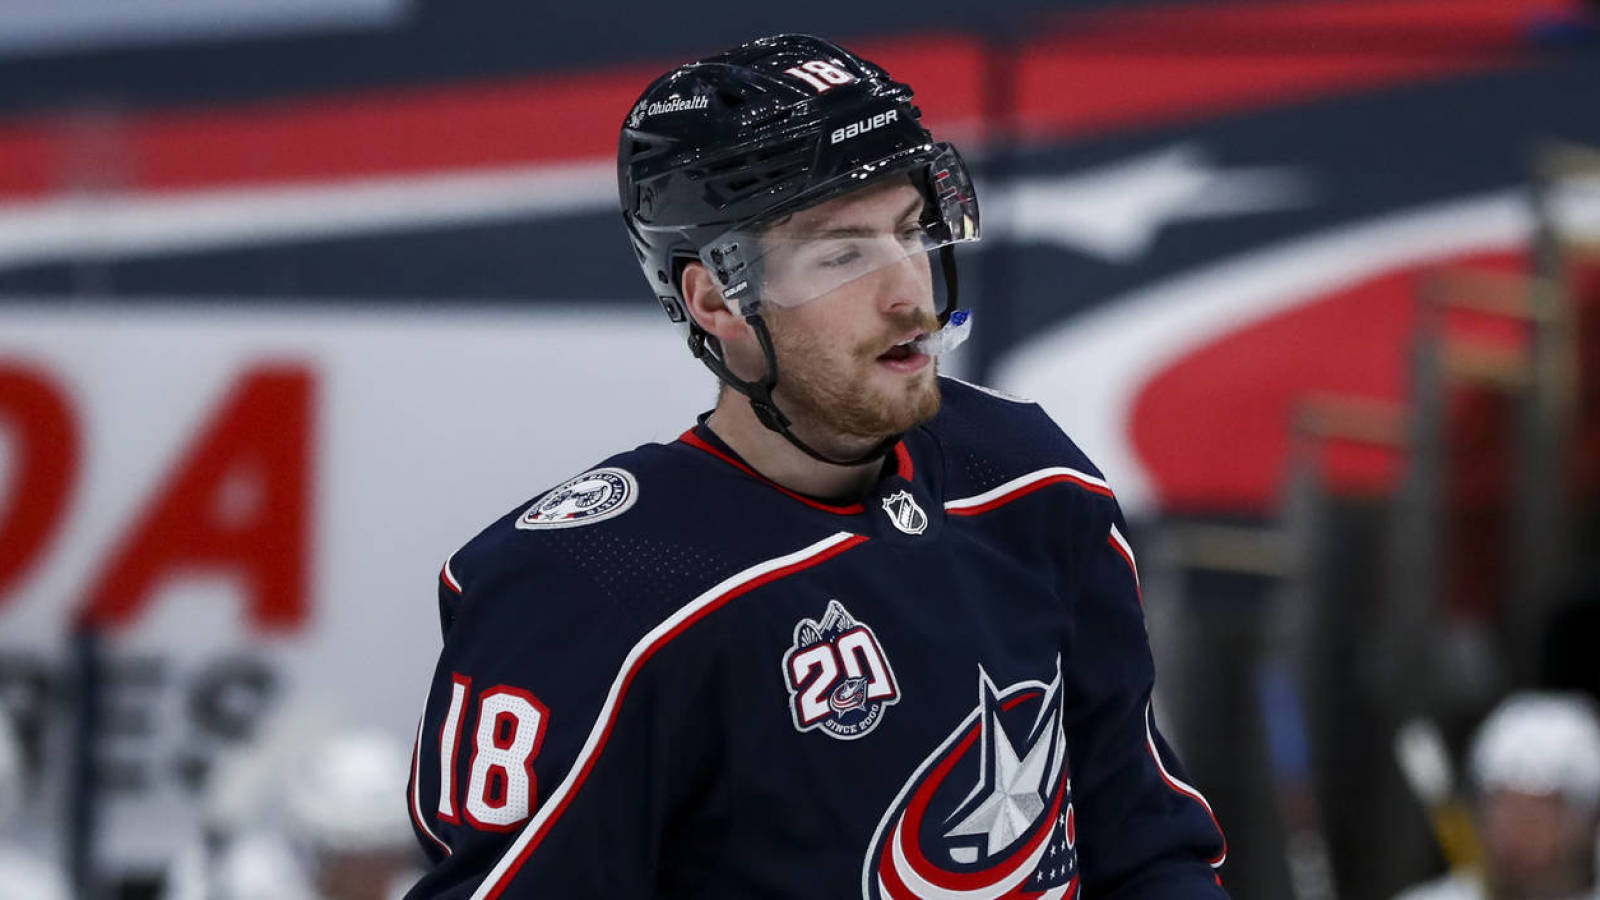 Report: Blue Jackets to trade Pierre-Luc Dubois to Jets for Patrik Laine - Yardbarker